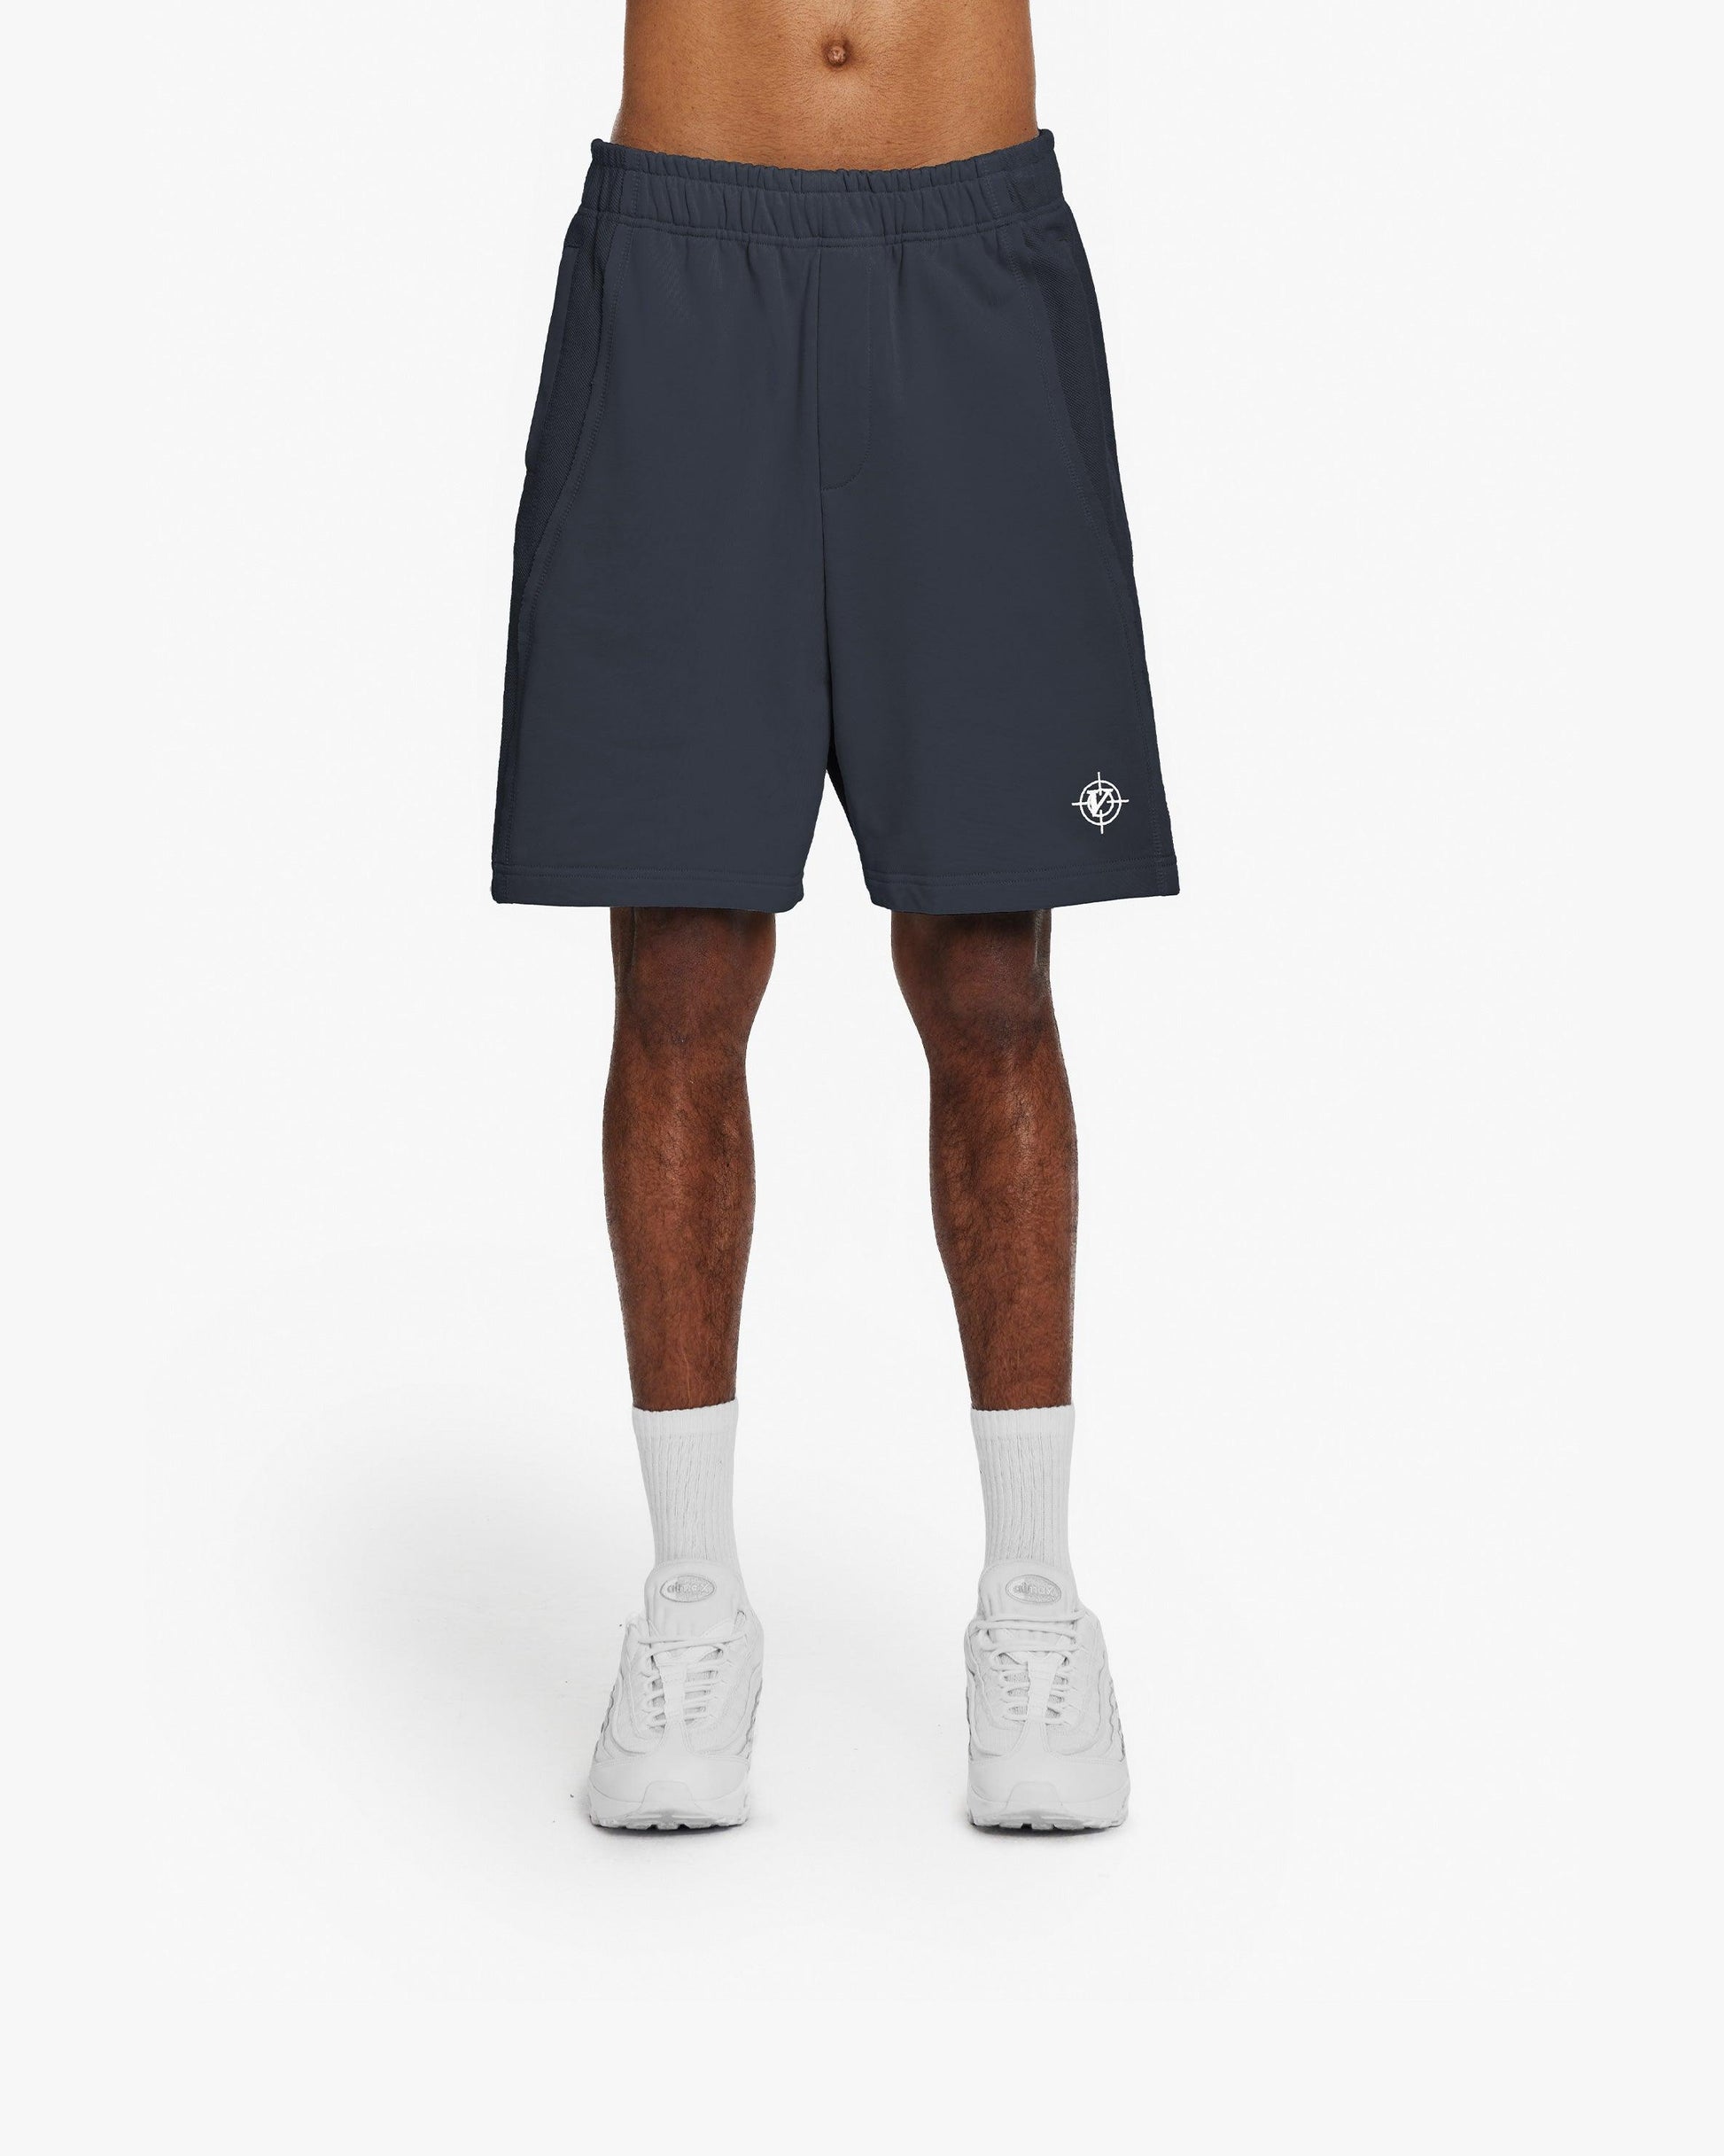 INSIDE OUT SHORTS NAVY - VICINITY